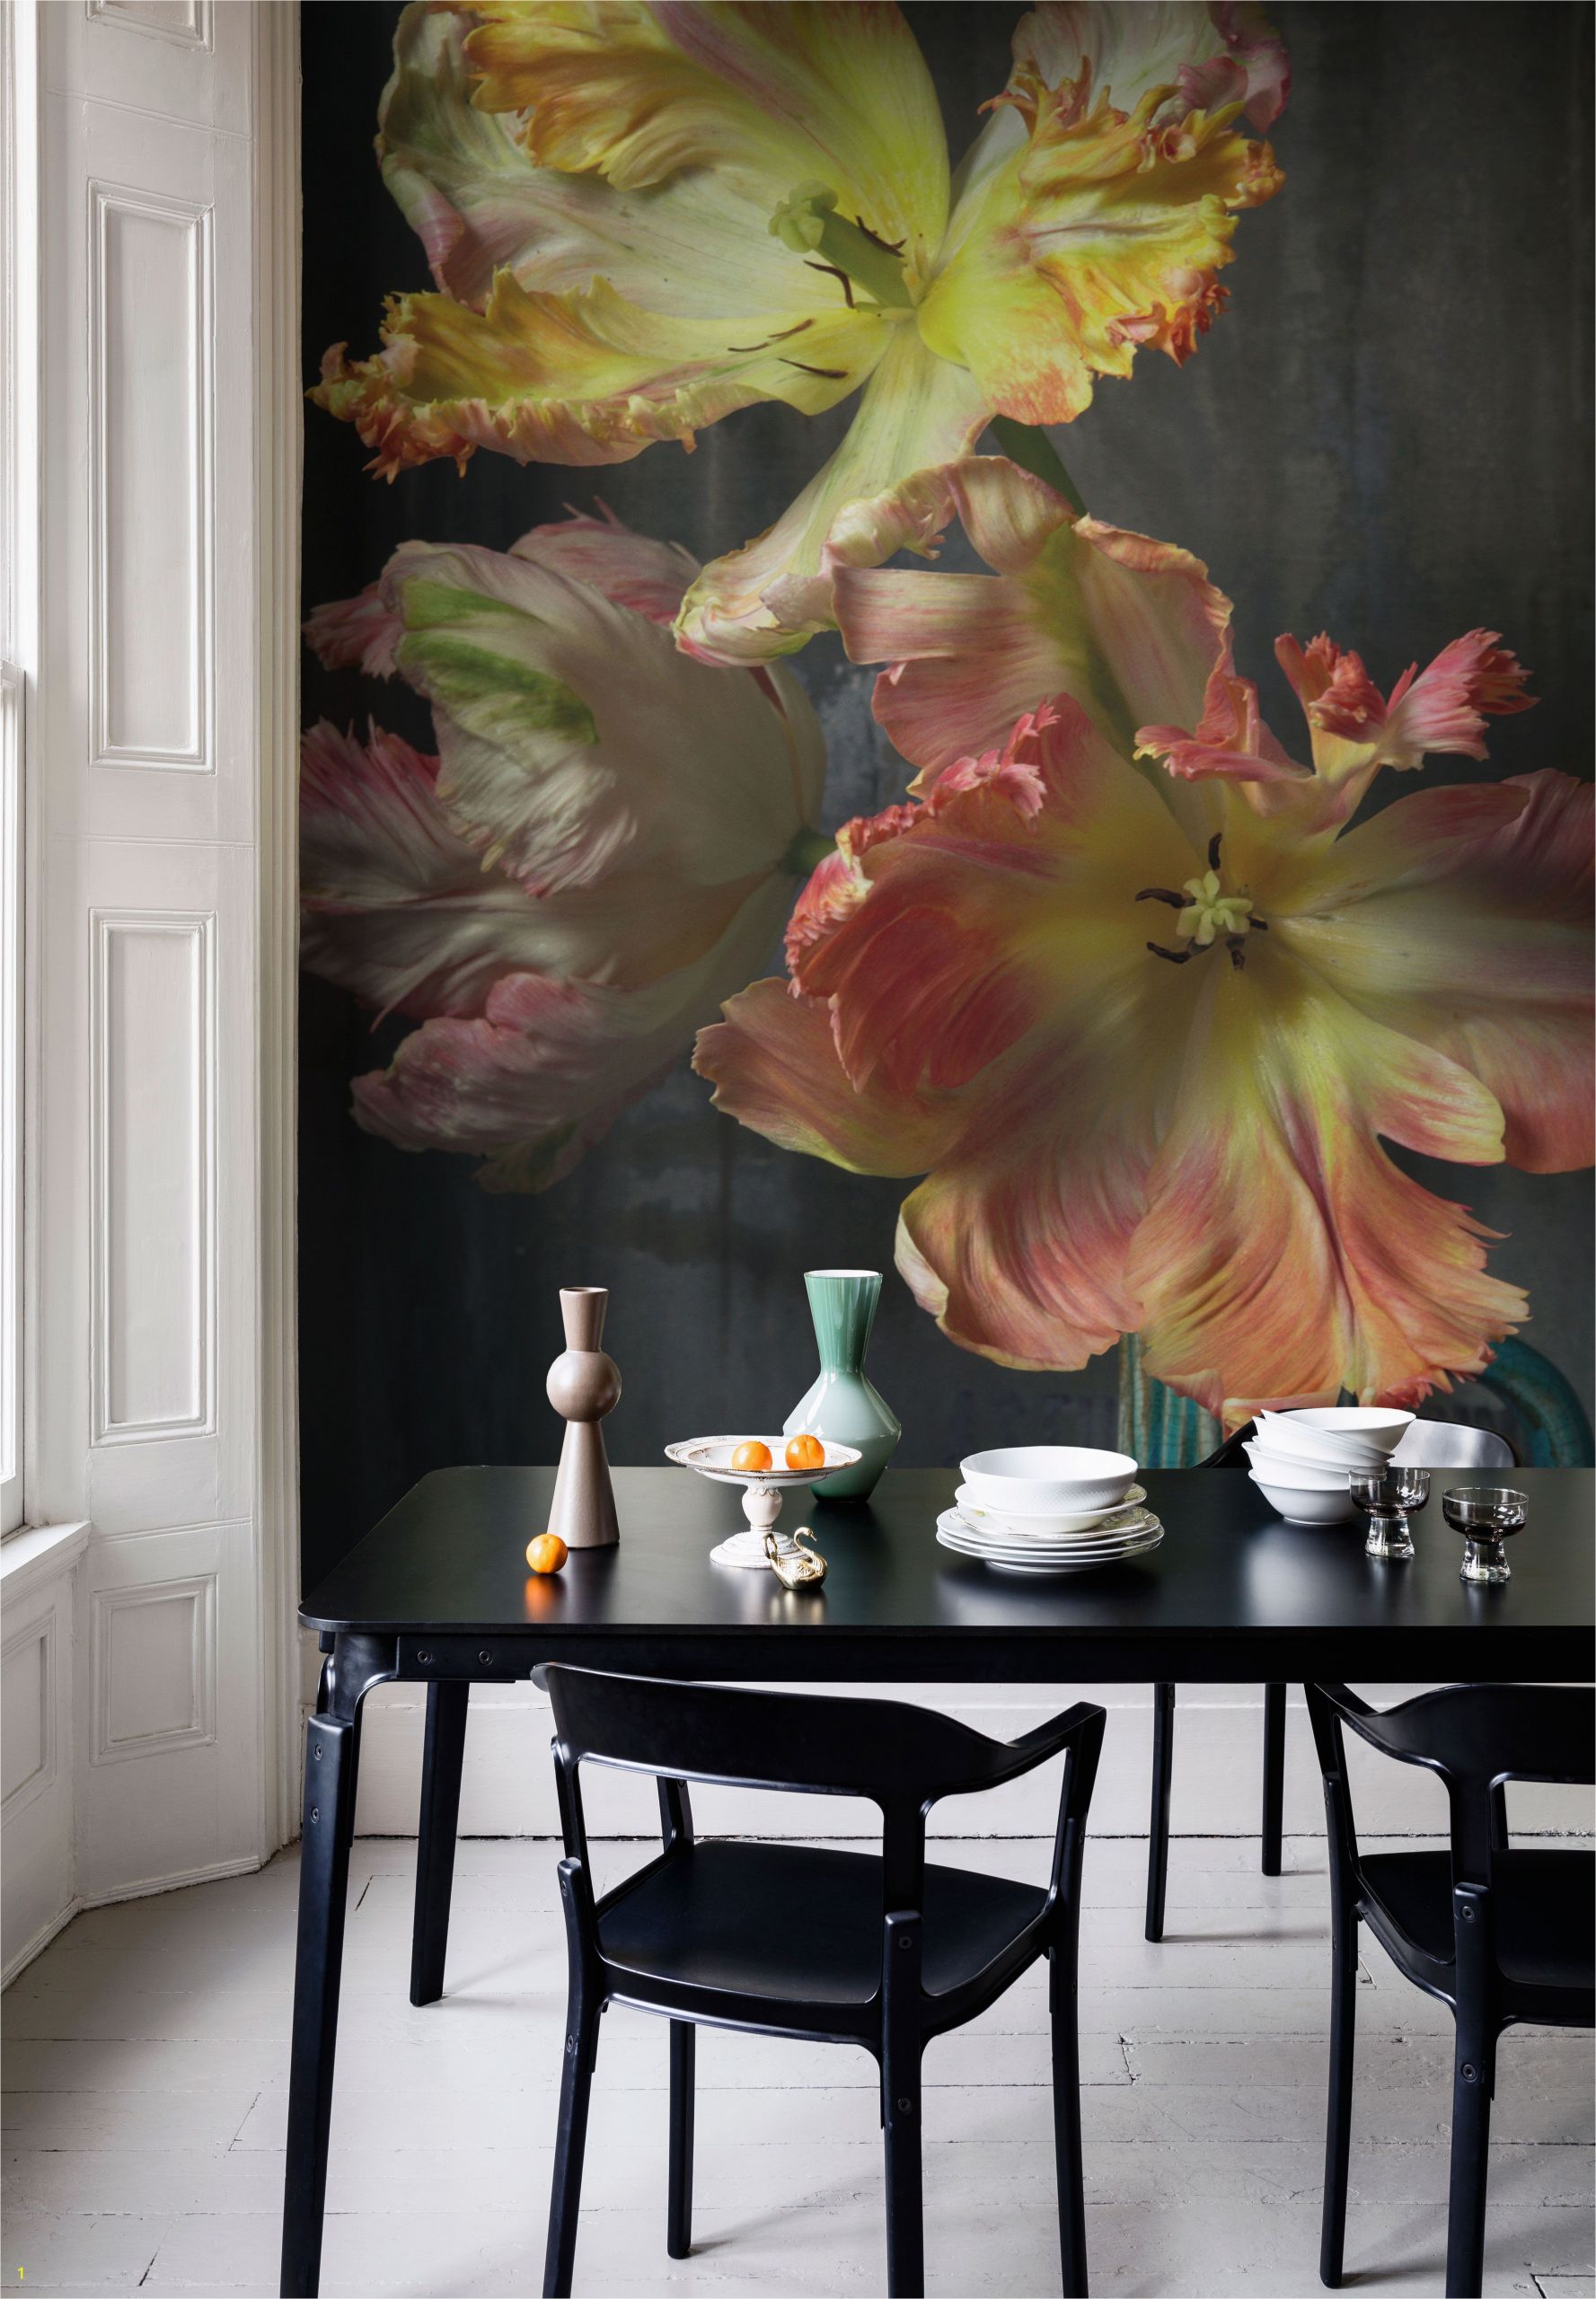 Wall Art Mural Ideas Bursting Flower Still Mural Trunk Archive Collection From